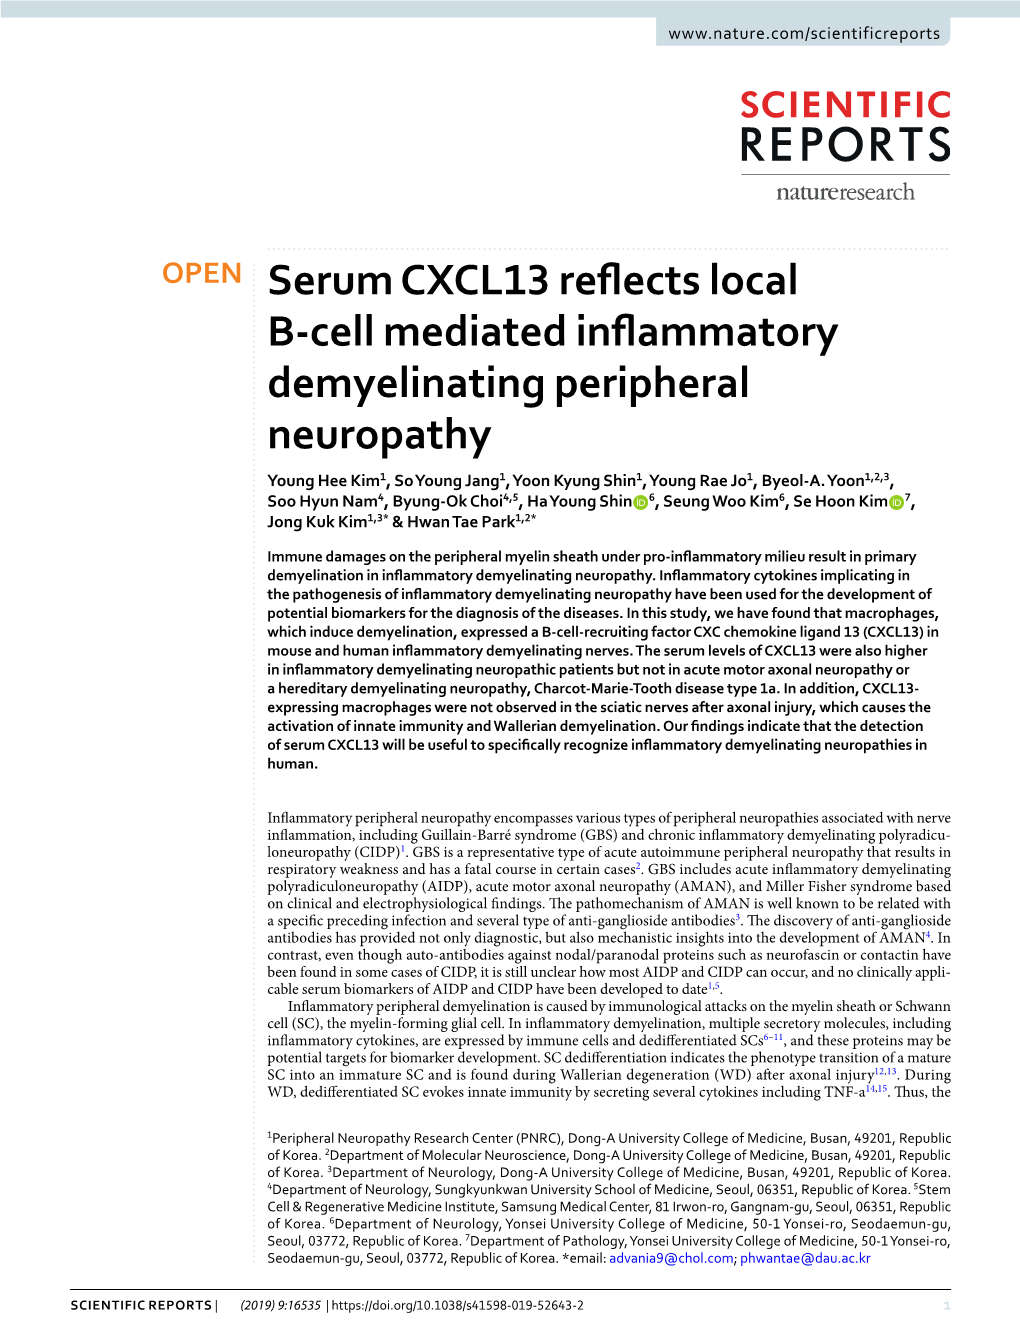 Serum CXCL13 Reflects Local B-Cell Mediated Inflammatory